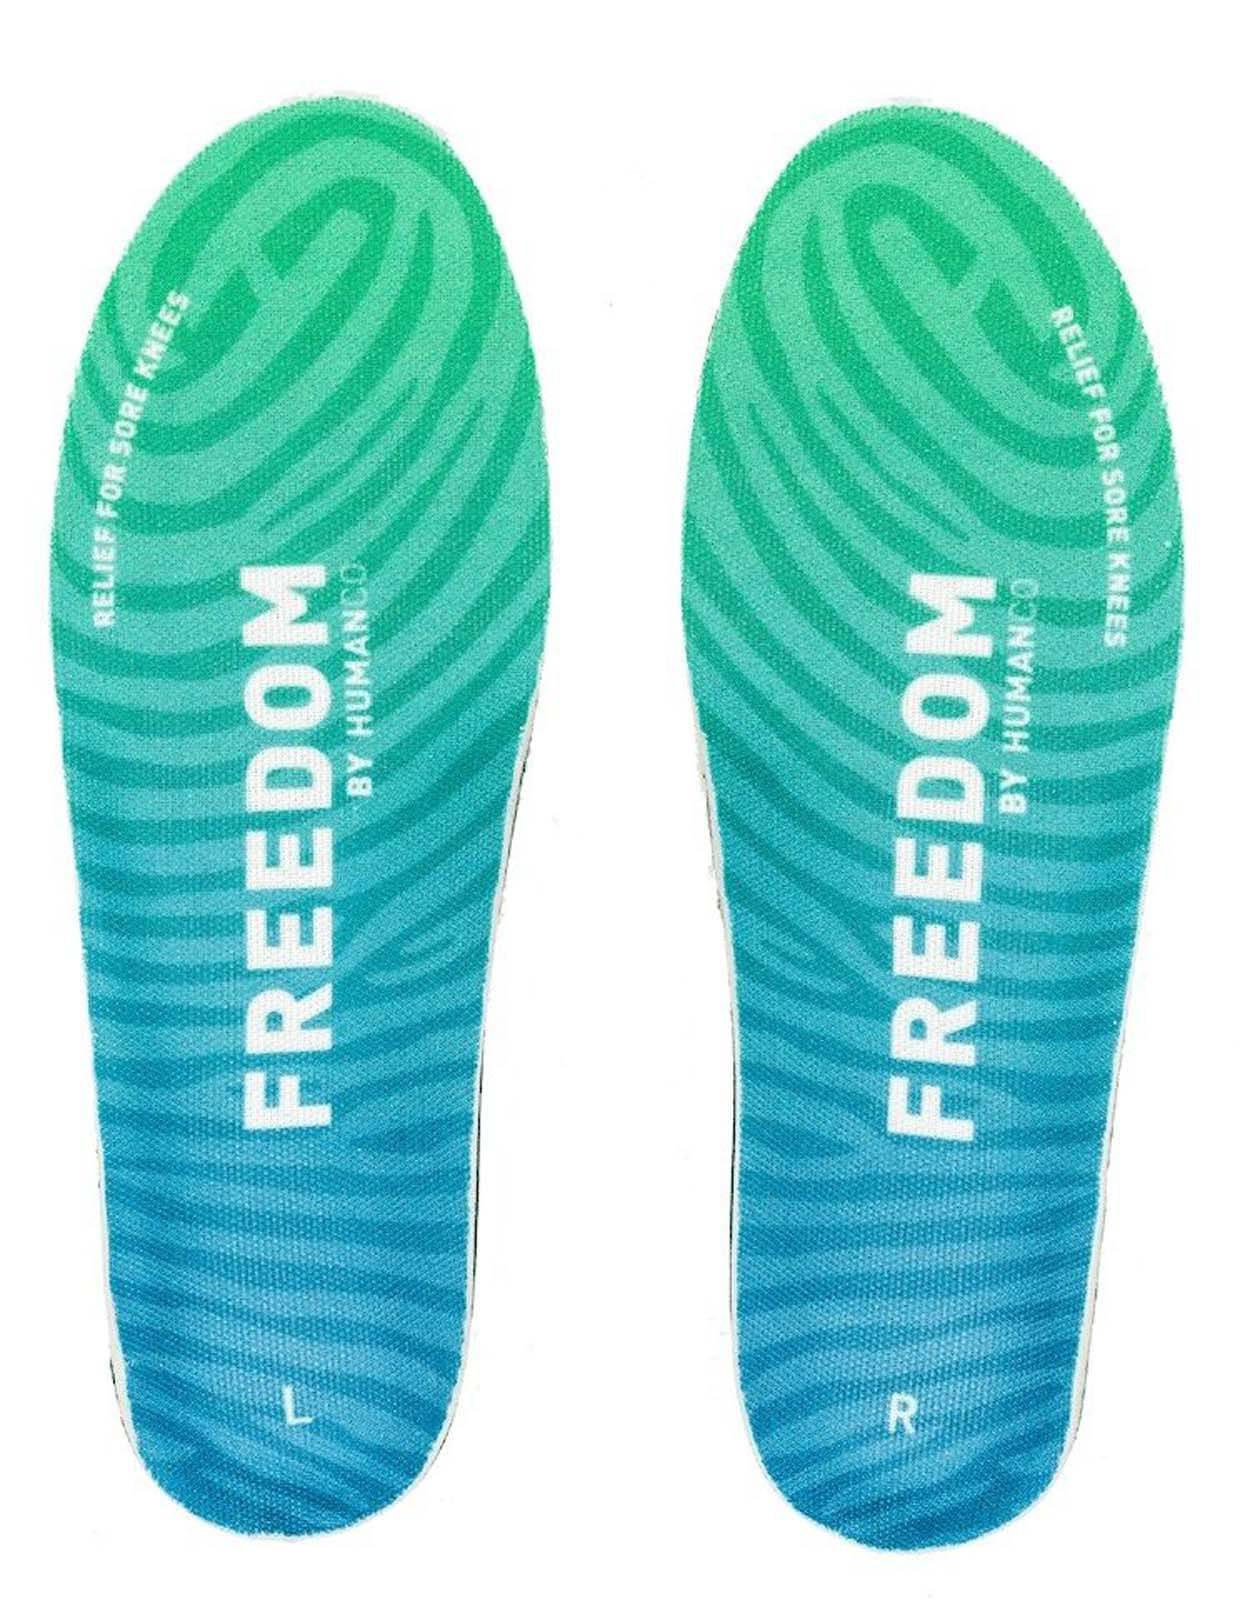 The Freedom Insole